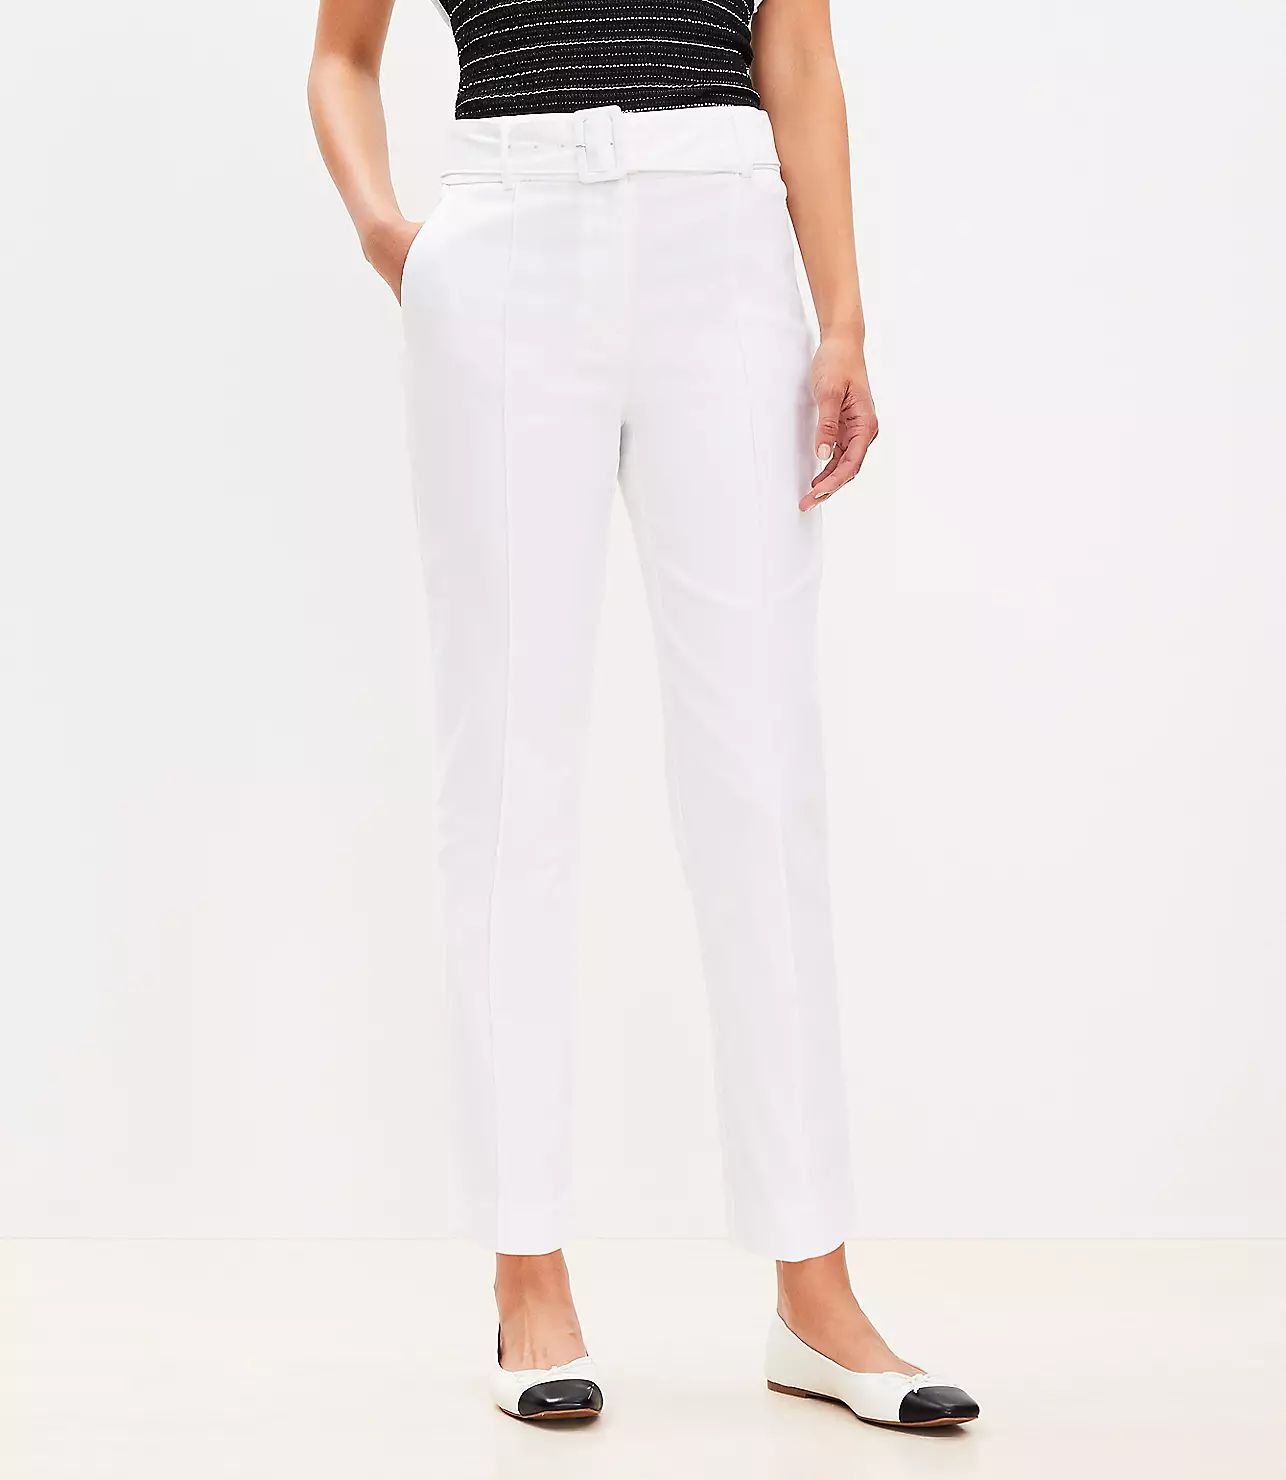 Pintucked Belted Slim Pants in Stretch Linen Blend | LOFT